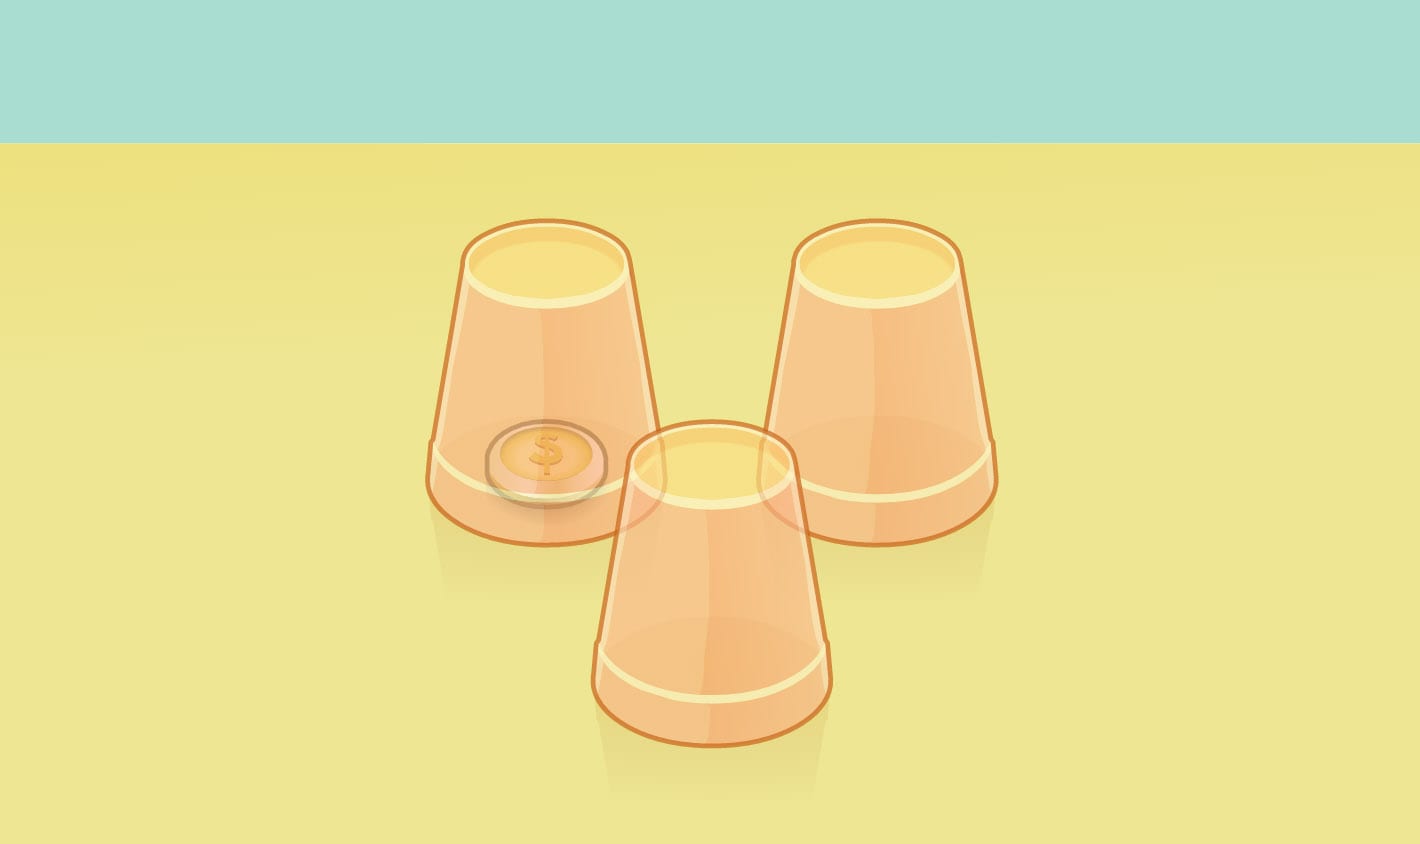 draadloos bodem manipuleren Tricky Cups | ImproveMemory.org - Brain Games for Kids and Adults